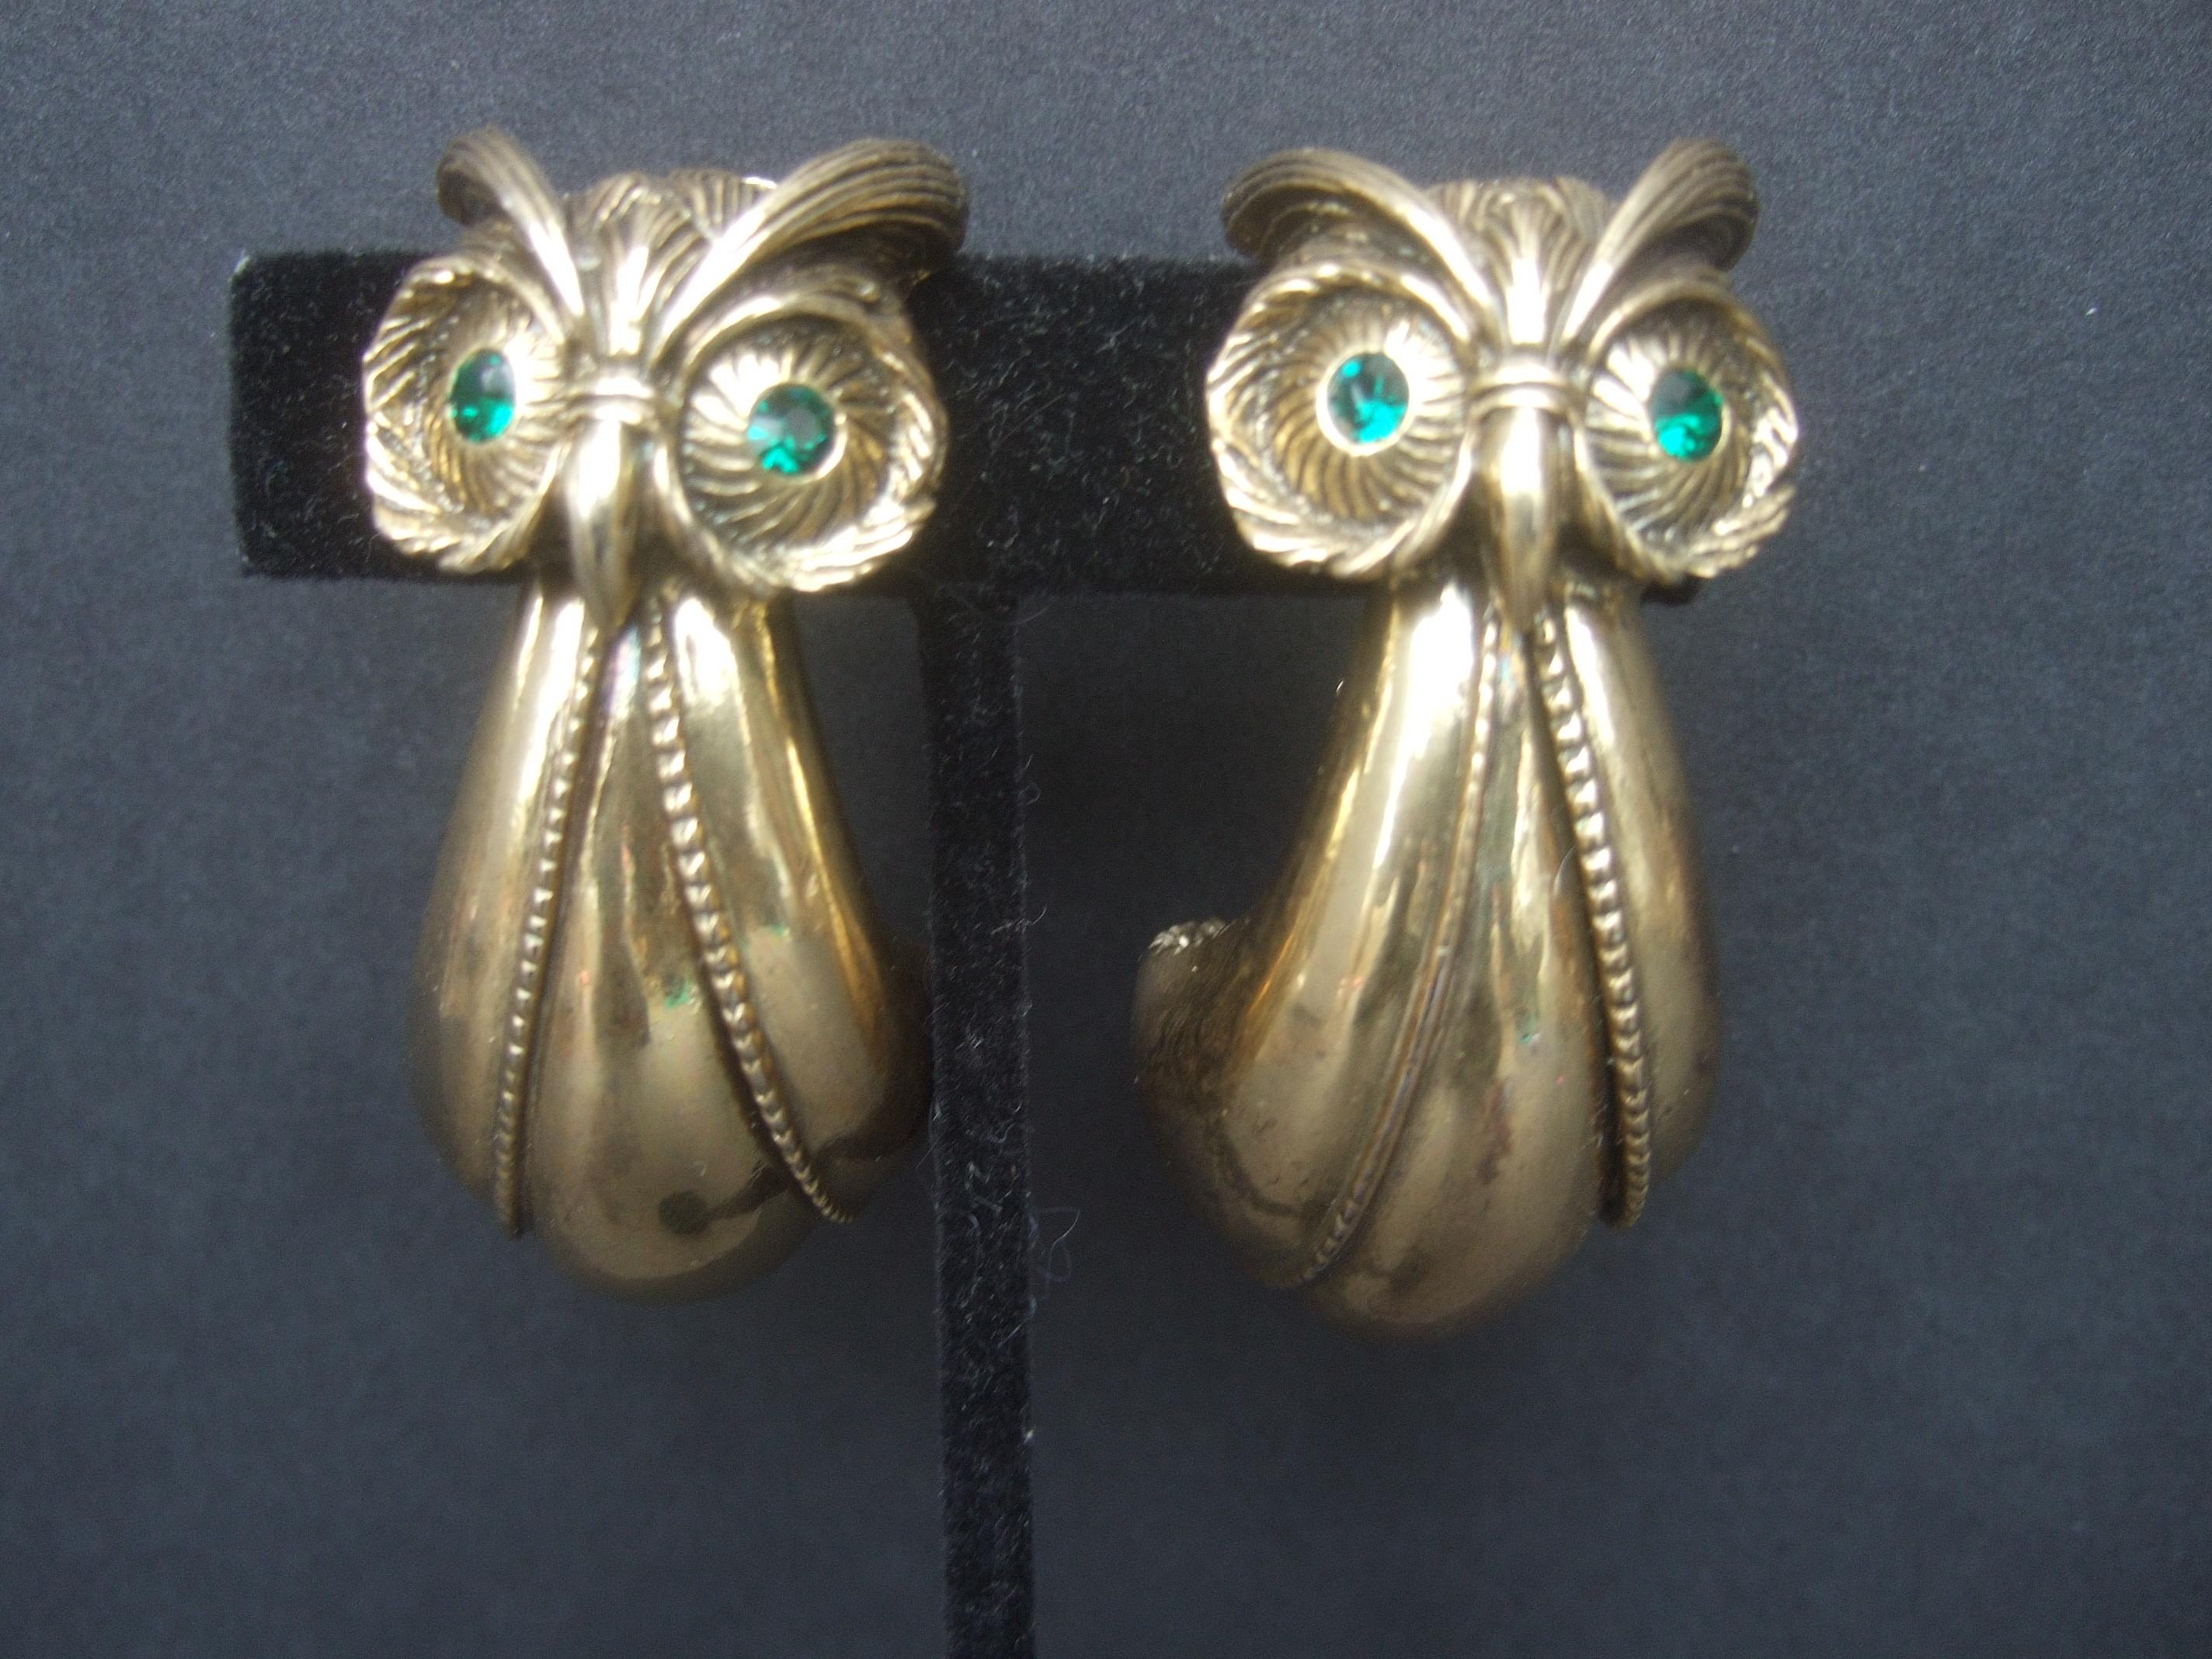 Stylized large scale gilt metal clip-on owl earrings c 1970s
The unique figural statement earrings are designed with a pair
of endearing owls 

Embellished with green crystals eyes. The sleek gilt metal plating
is accented with impressed & etched